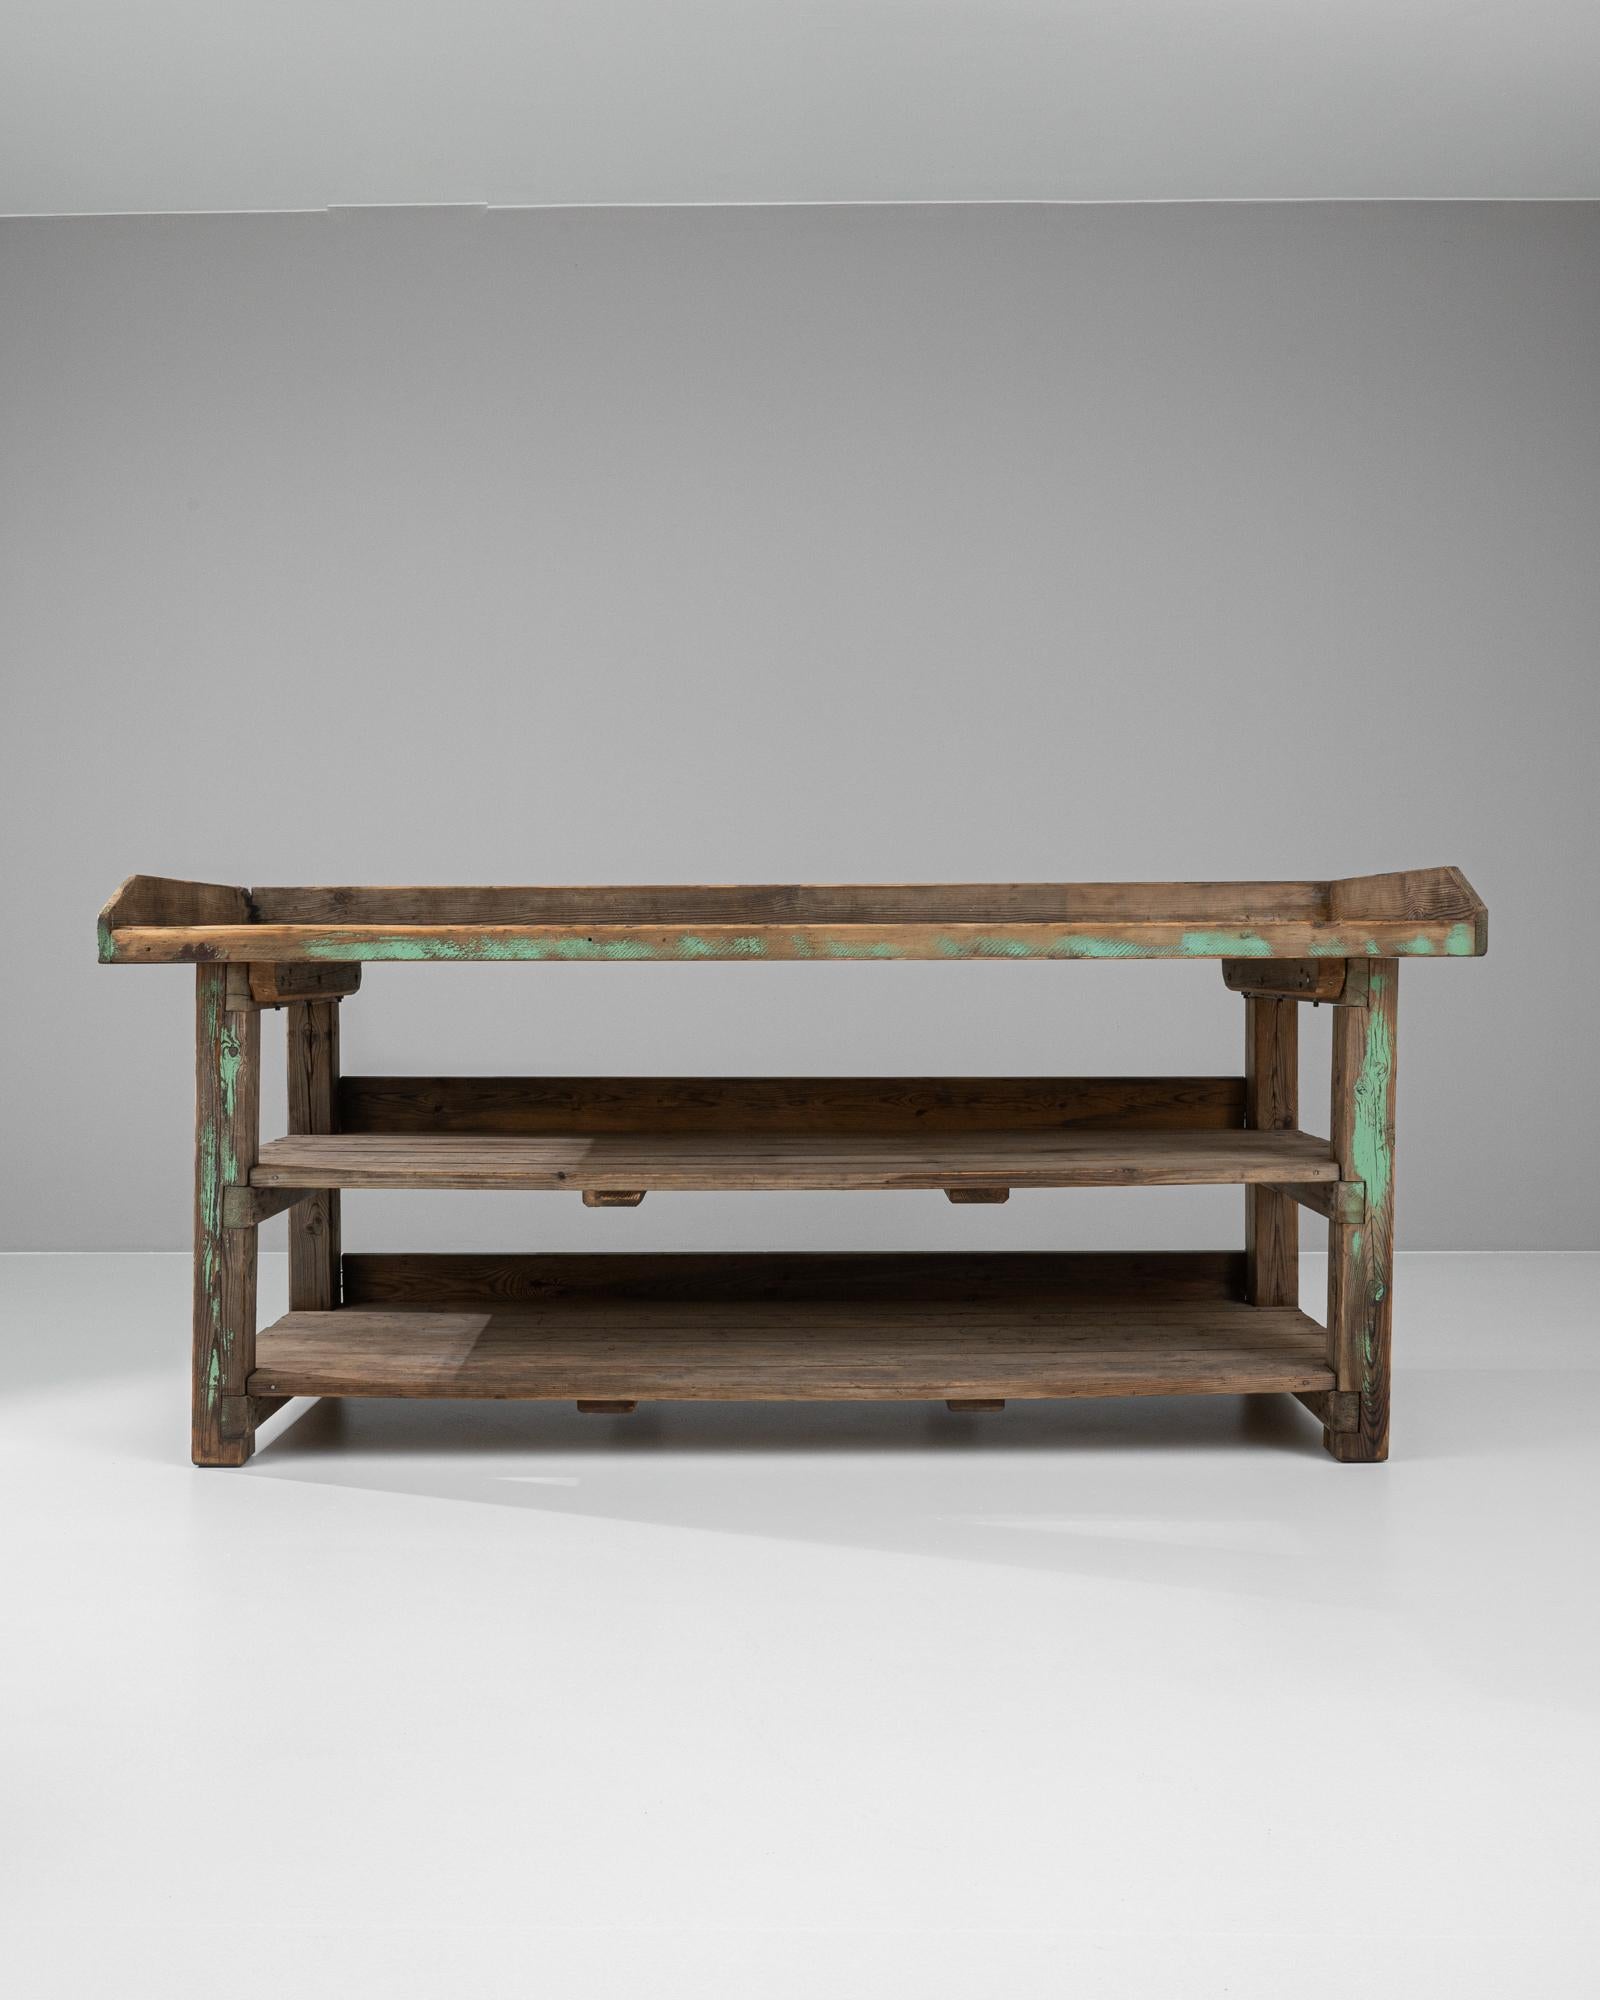 This 20th-century French wooden work table encapsulates the rustic charm and utilitarian spirit of its time. Featuring sturdy construction, the table boasts a robust wooden top and frame accented with remnants of original teal paint, adding a touch